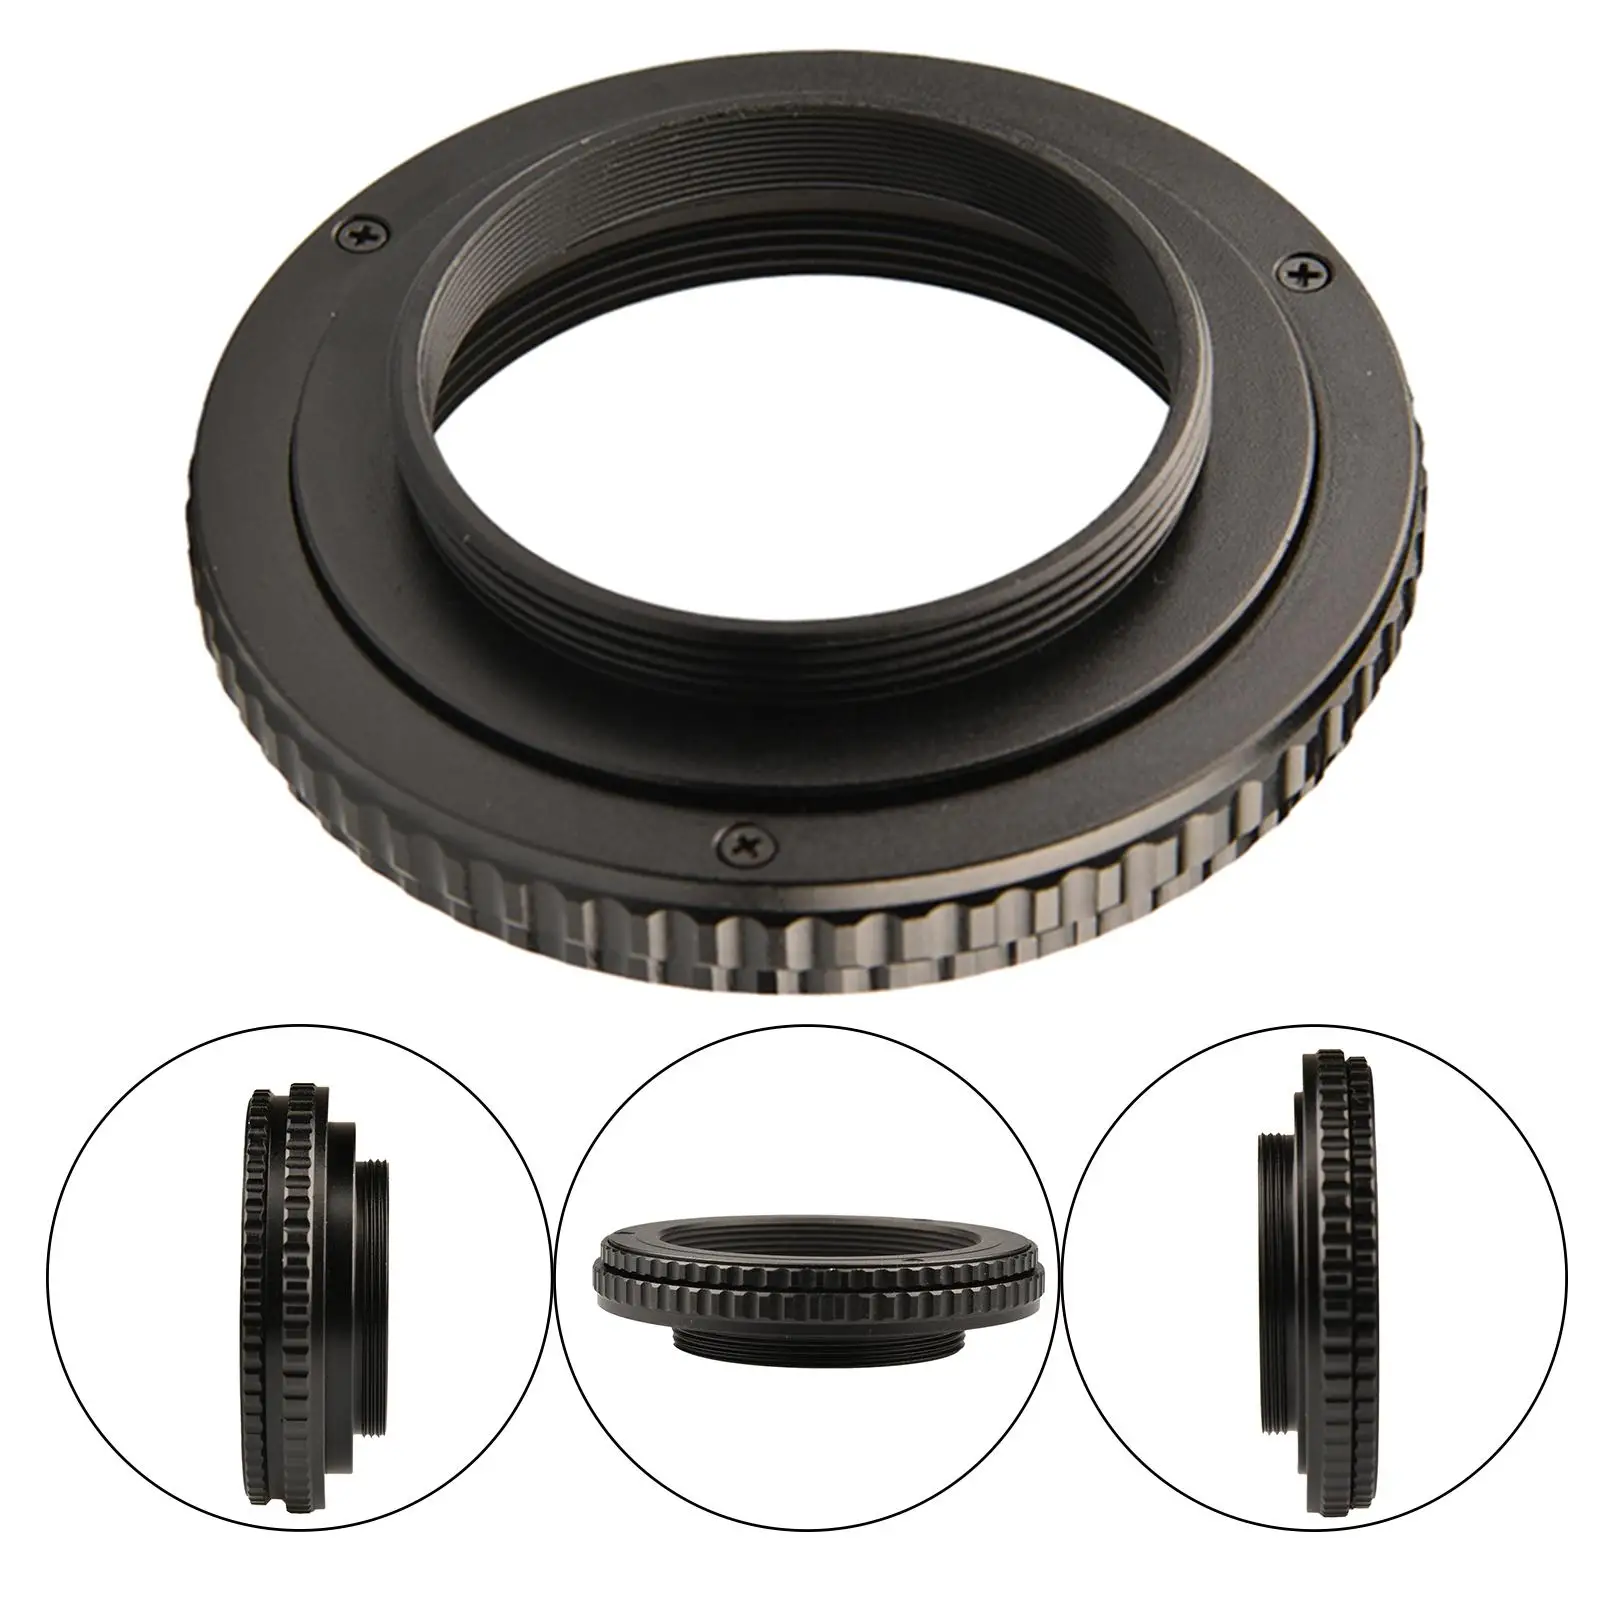 Macro Extension Tube Adapter Ring M39 x 1mm Male to M42 x 1mm Female Adjustable Focusing Screw Mount for Digital Slr Cameras